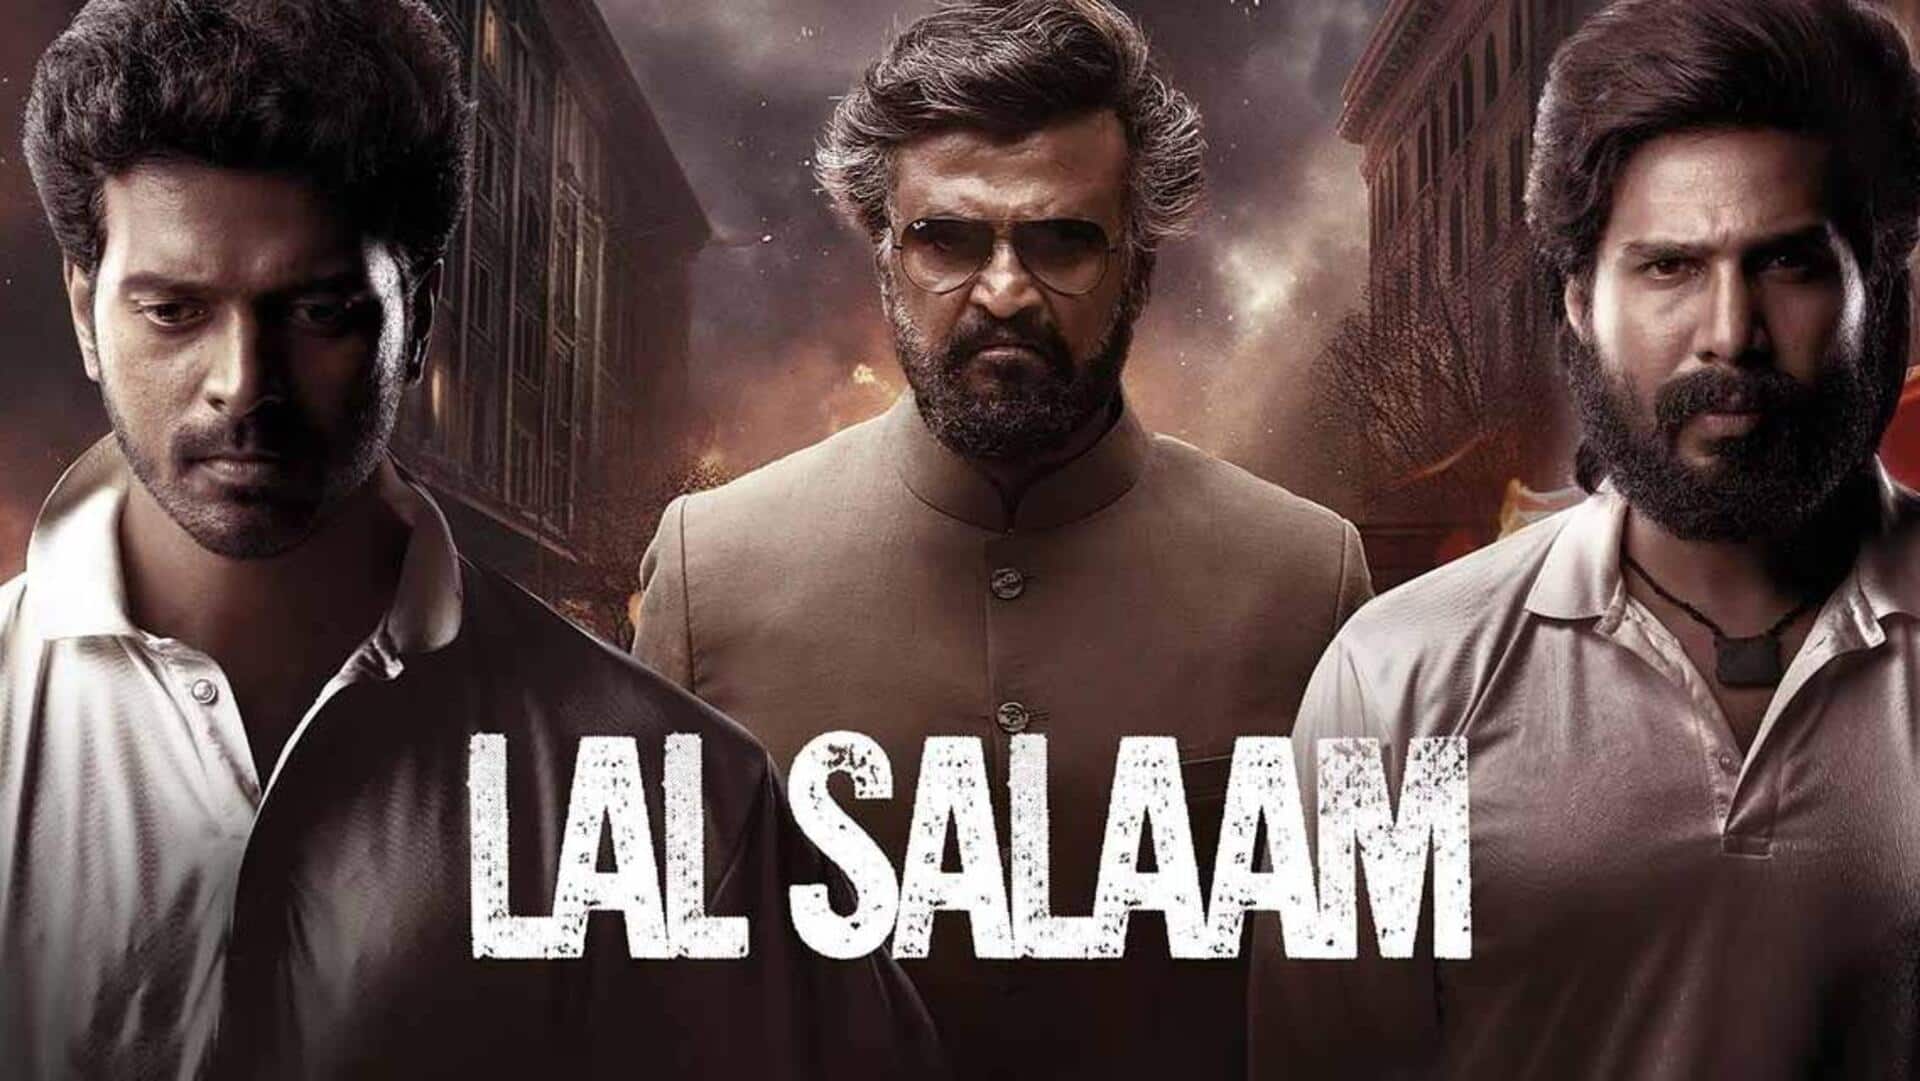 Box office: 'Lal Salaam' earns Rs. 4.3cr on opening day